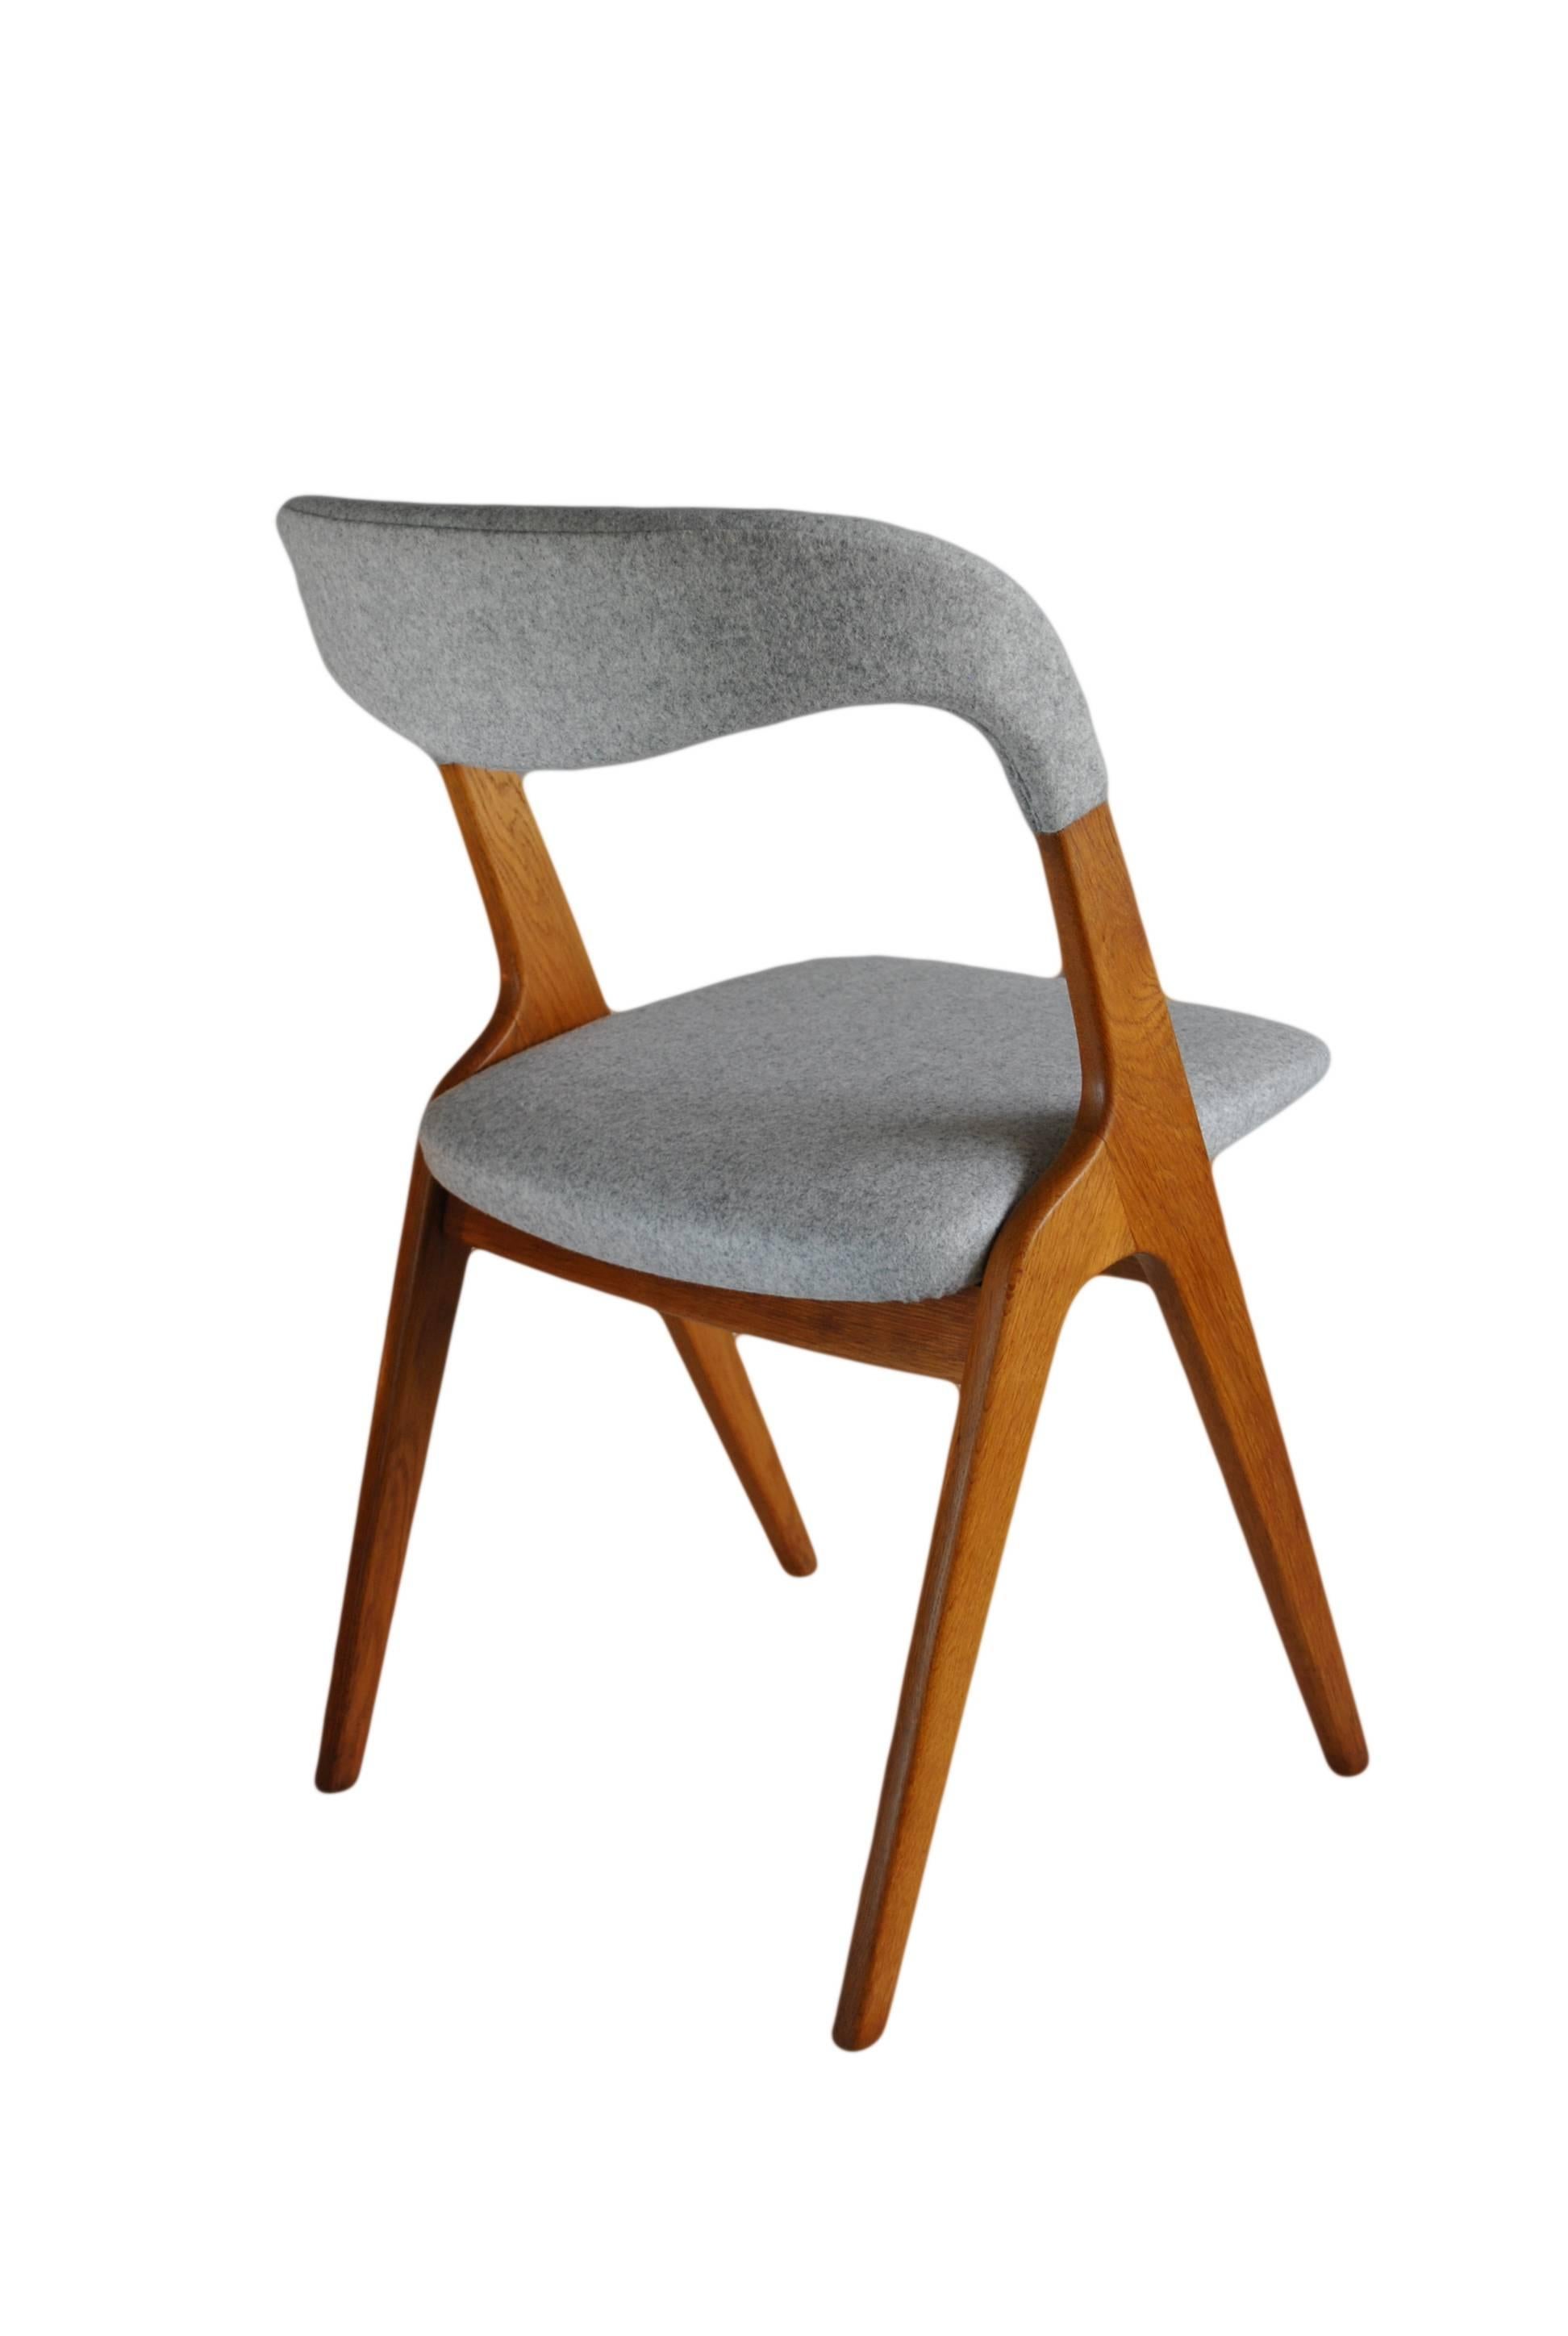 20th Century Johannes Andersen Dining chairs, set of 4. Fully Restored.